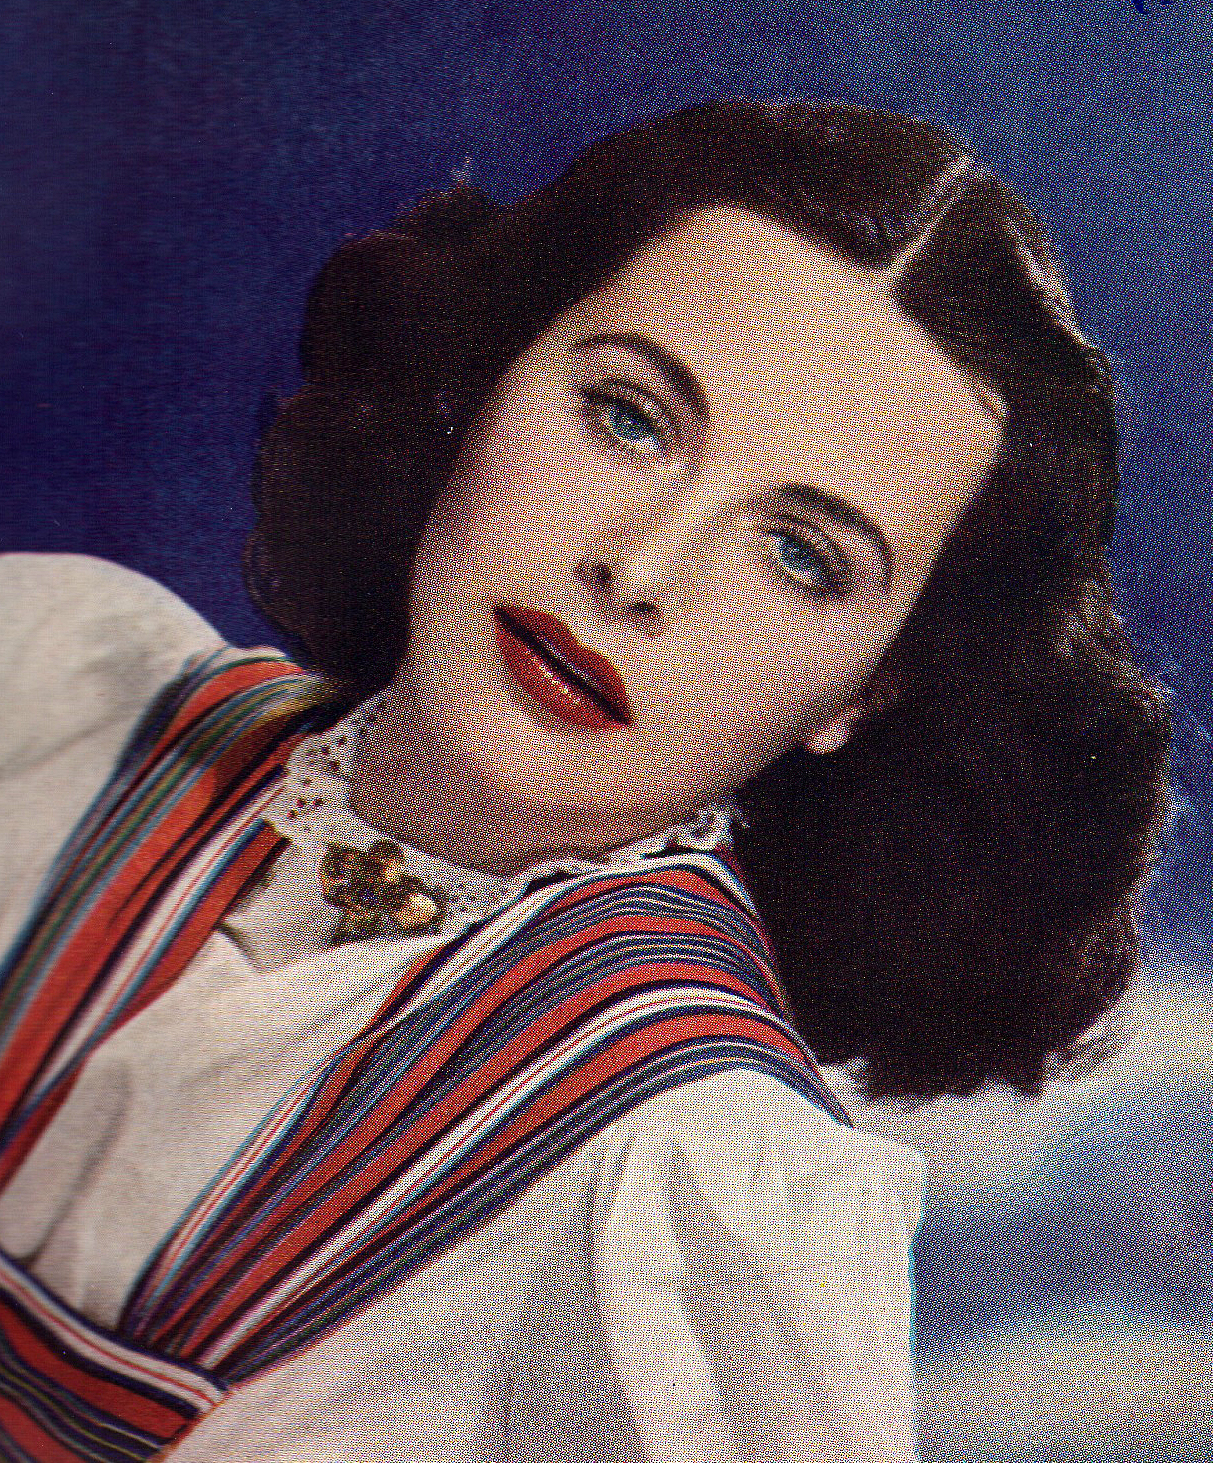 Yes to Hedy Lamarr.